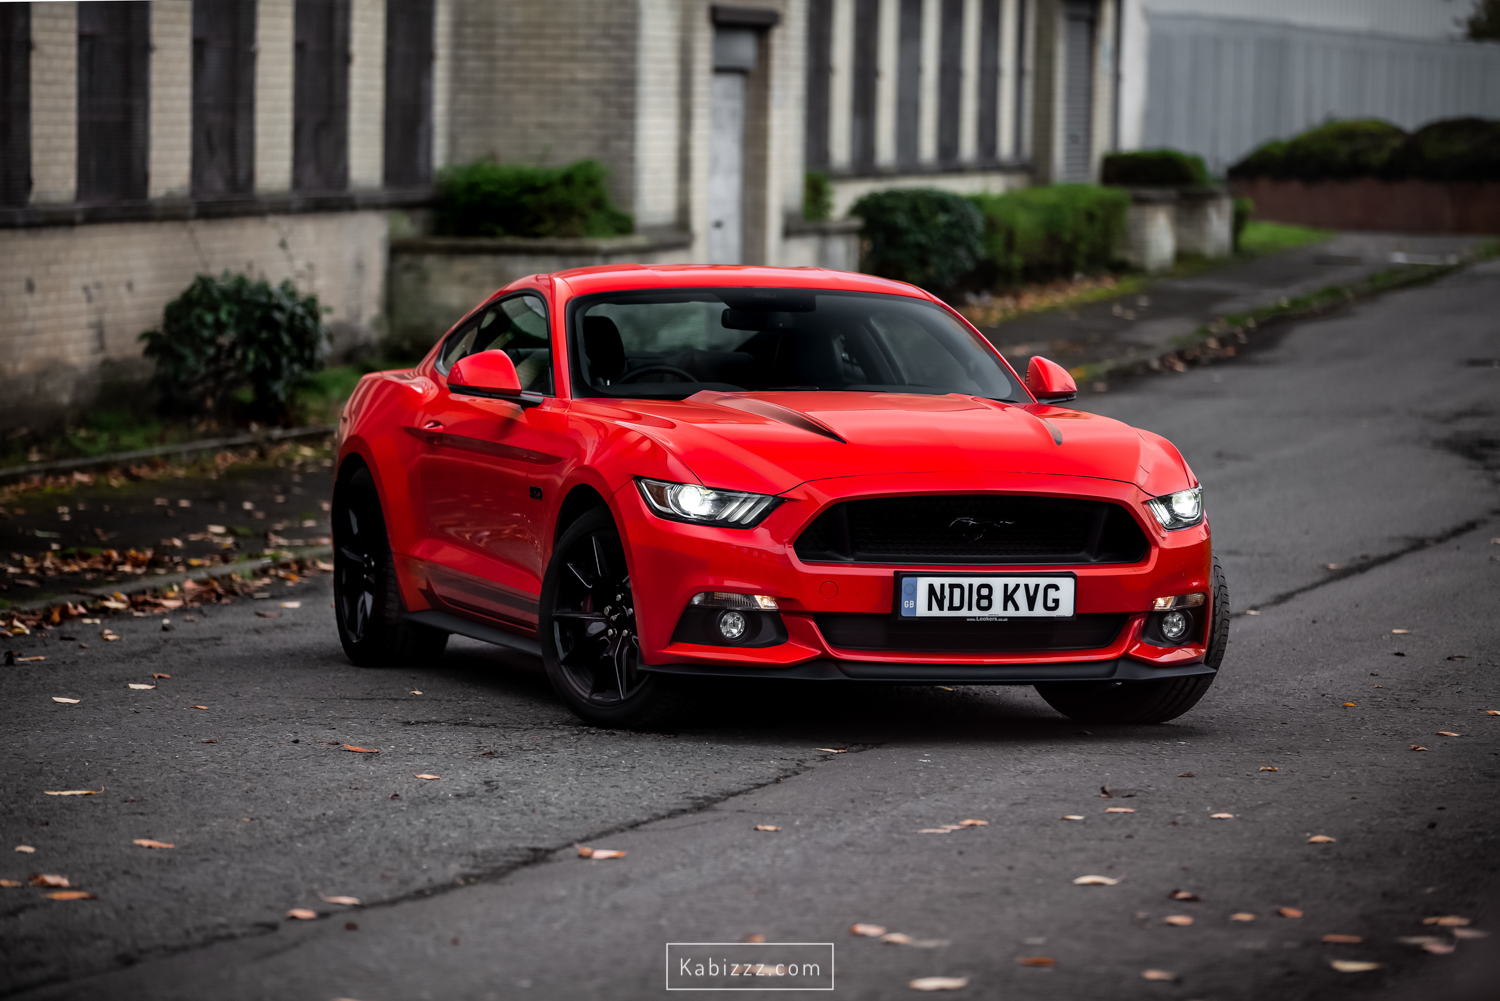 2018_ford_mustang_red_scotland_photography_automotive_photography_kabizzz-2.jpg